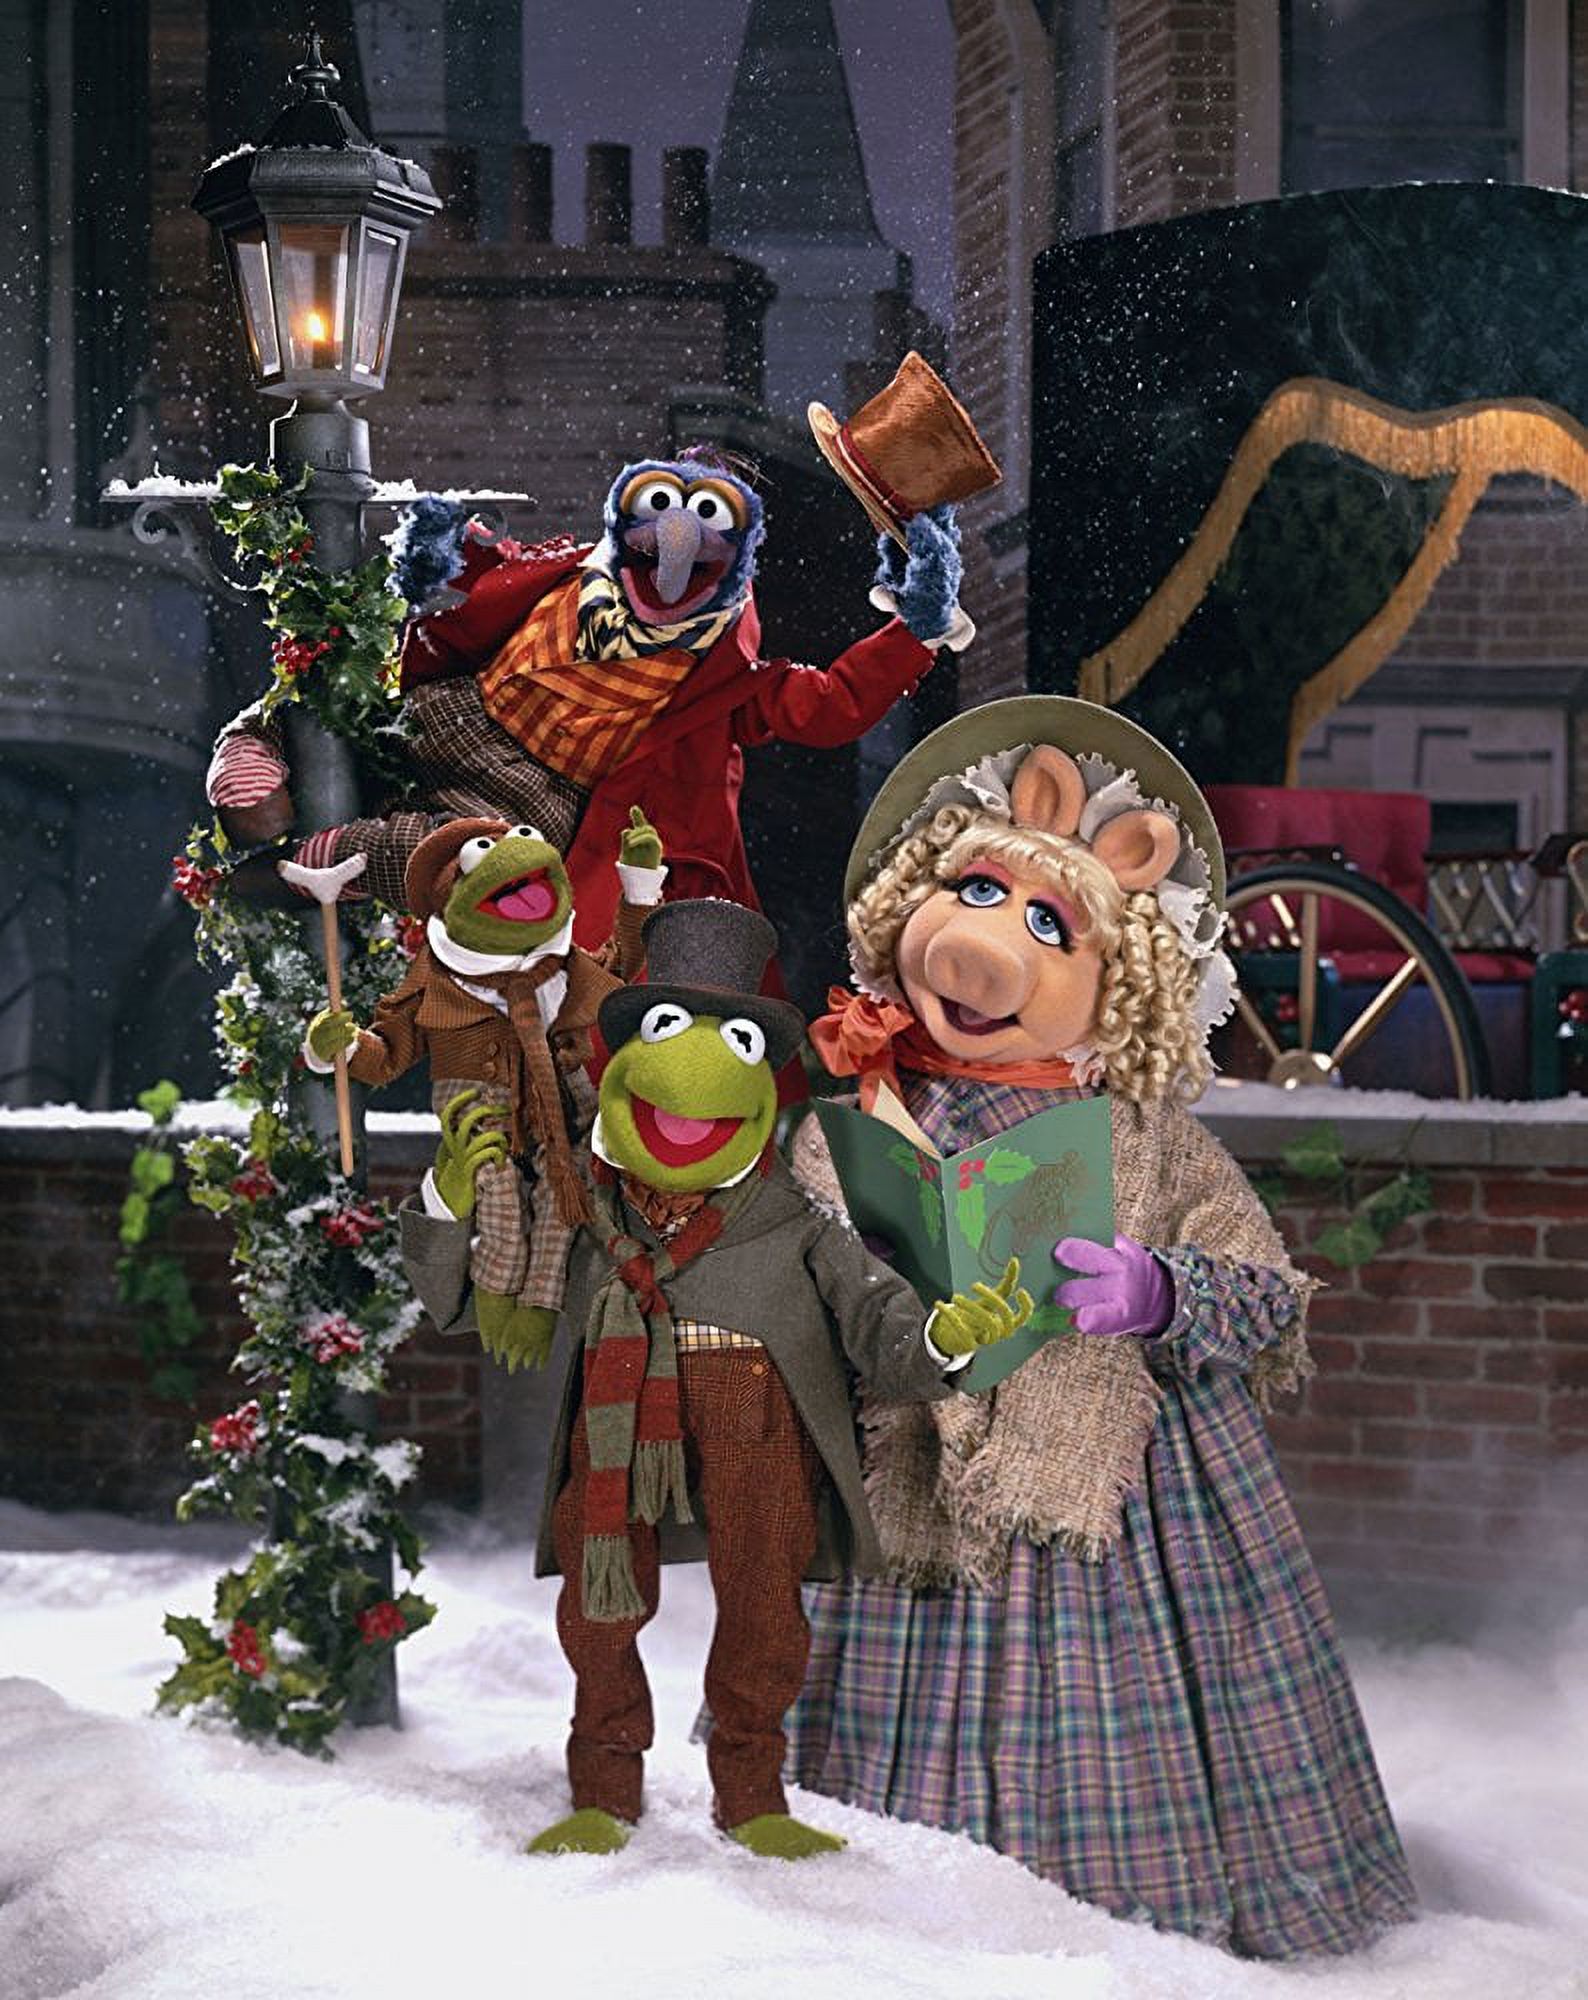 The Muppet Christmas Carol (Special Edition) (Blu-ray) - image 4 of 5